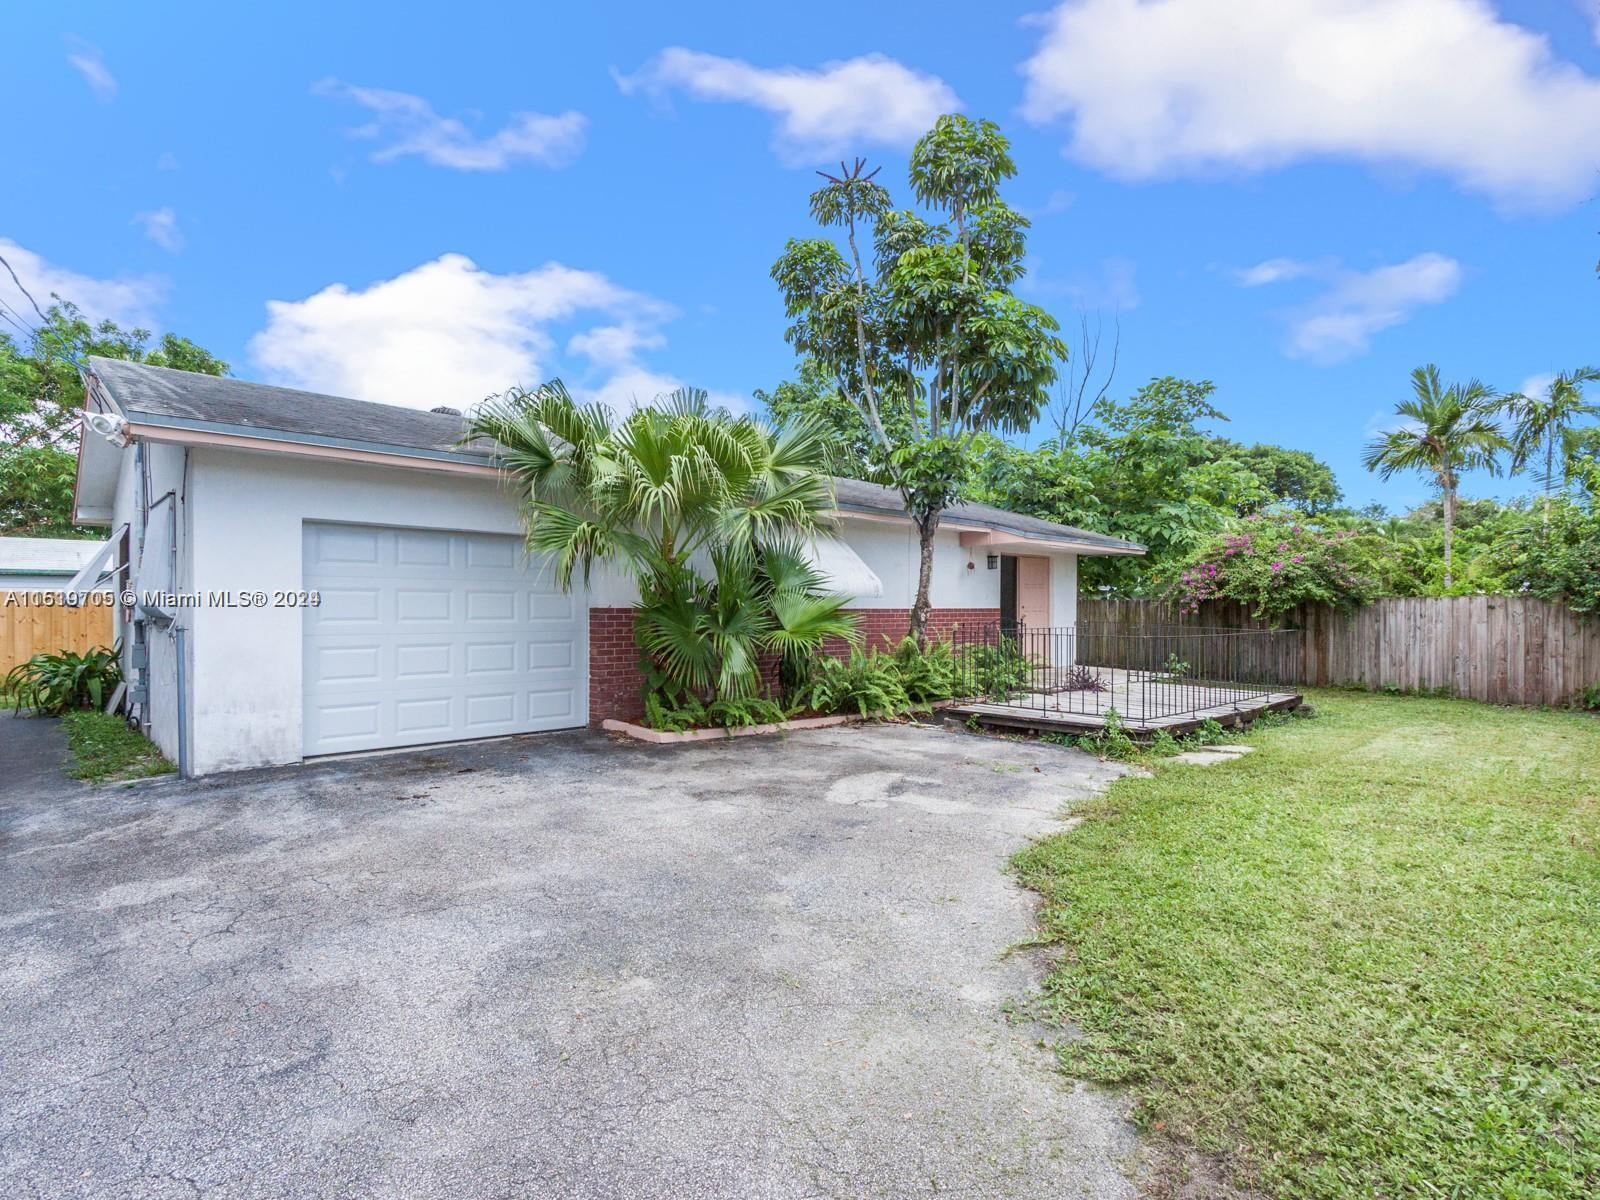 Photo of 2640 Garfield St in Hollywood, FL